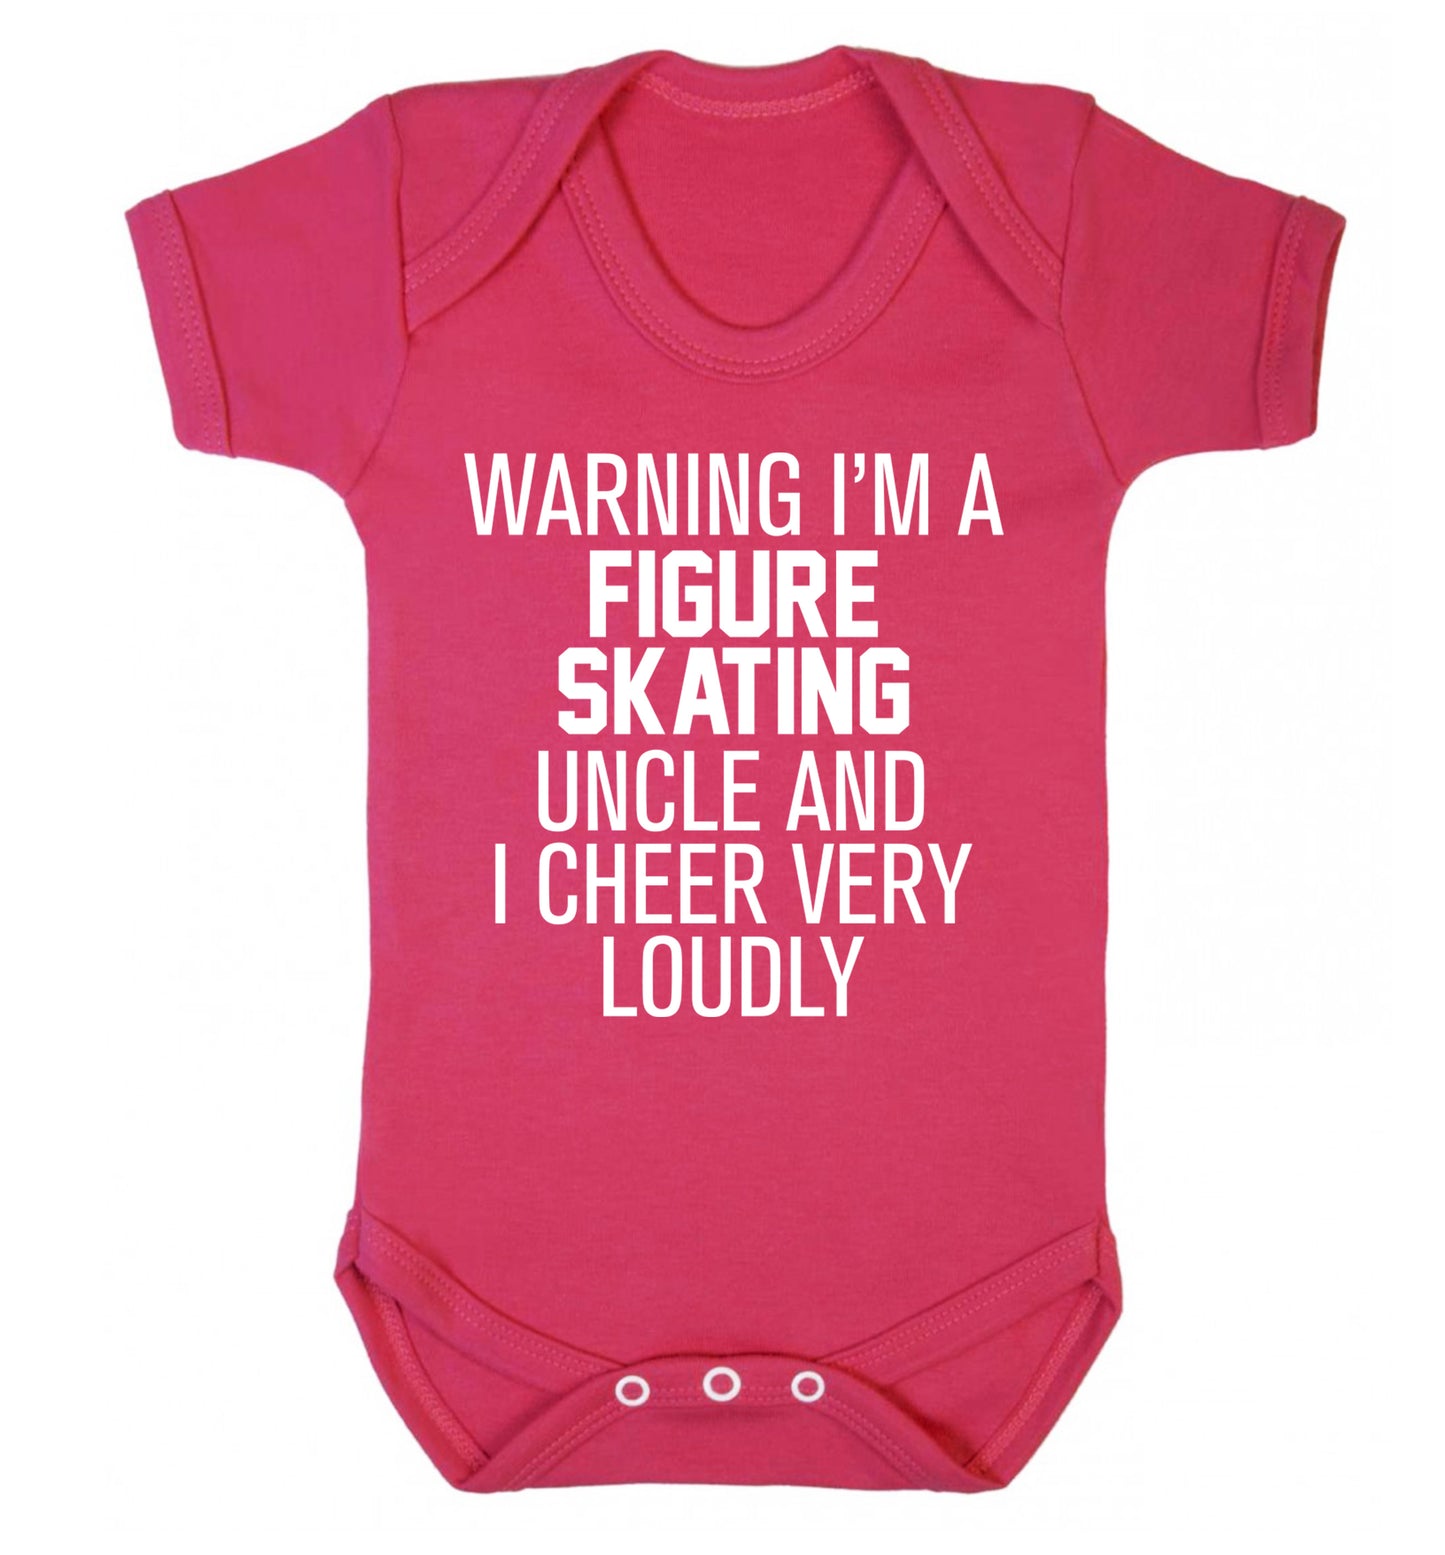 Warning I'm a figure skating uncle and I cheer very loudly Baby Vest dark pink 18-24 months